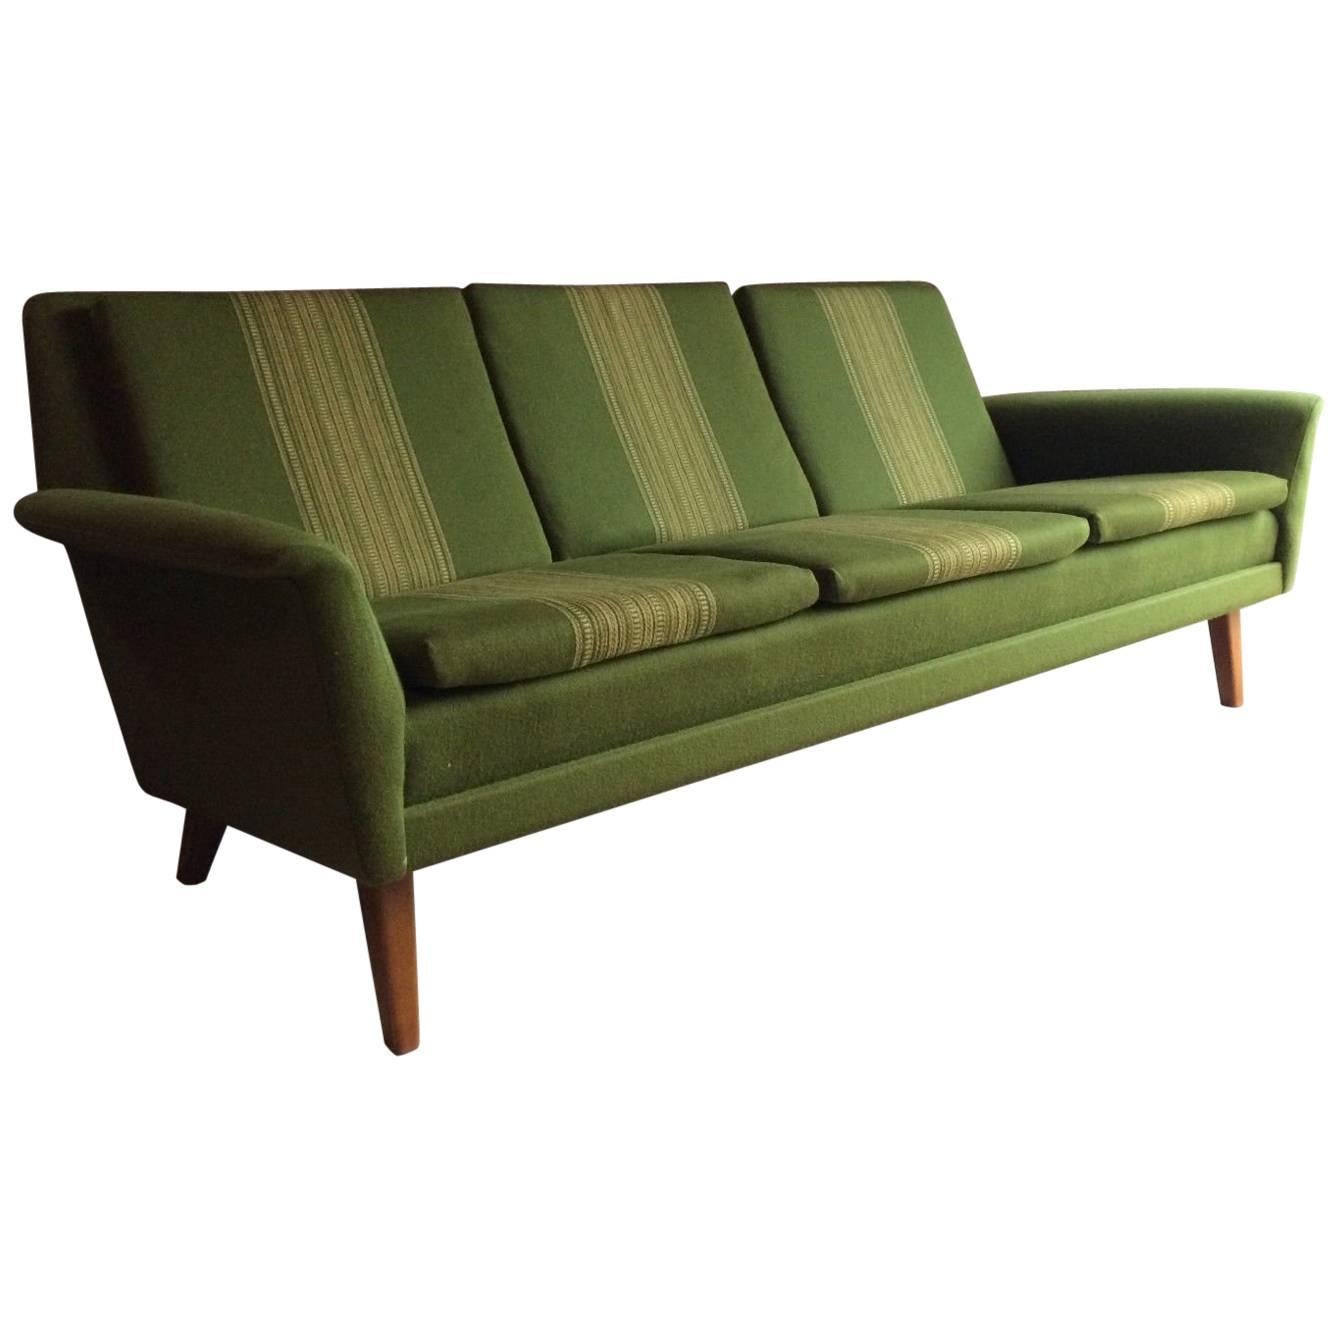 Midcentury Folke Ohlsson Three-Seat Sofa Made by Fritz Hansen for DUX, 1960s